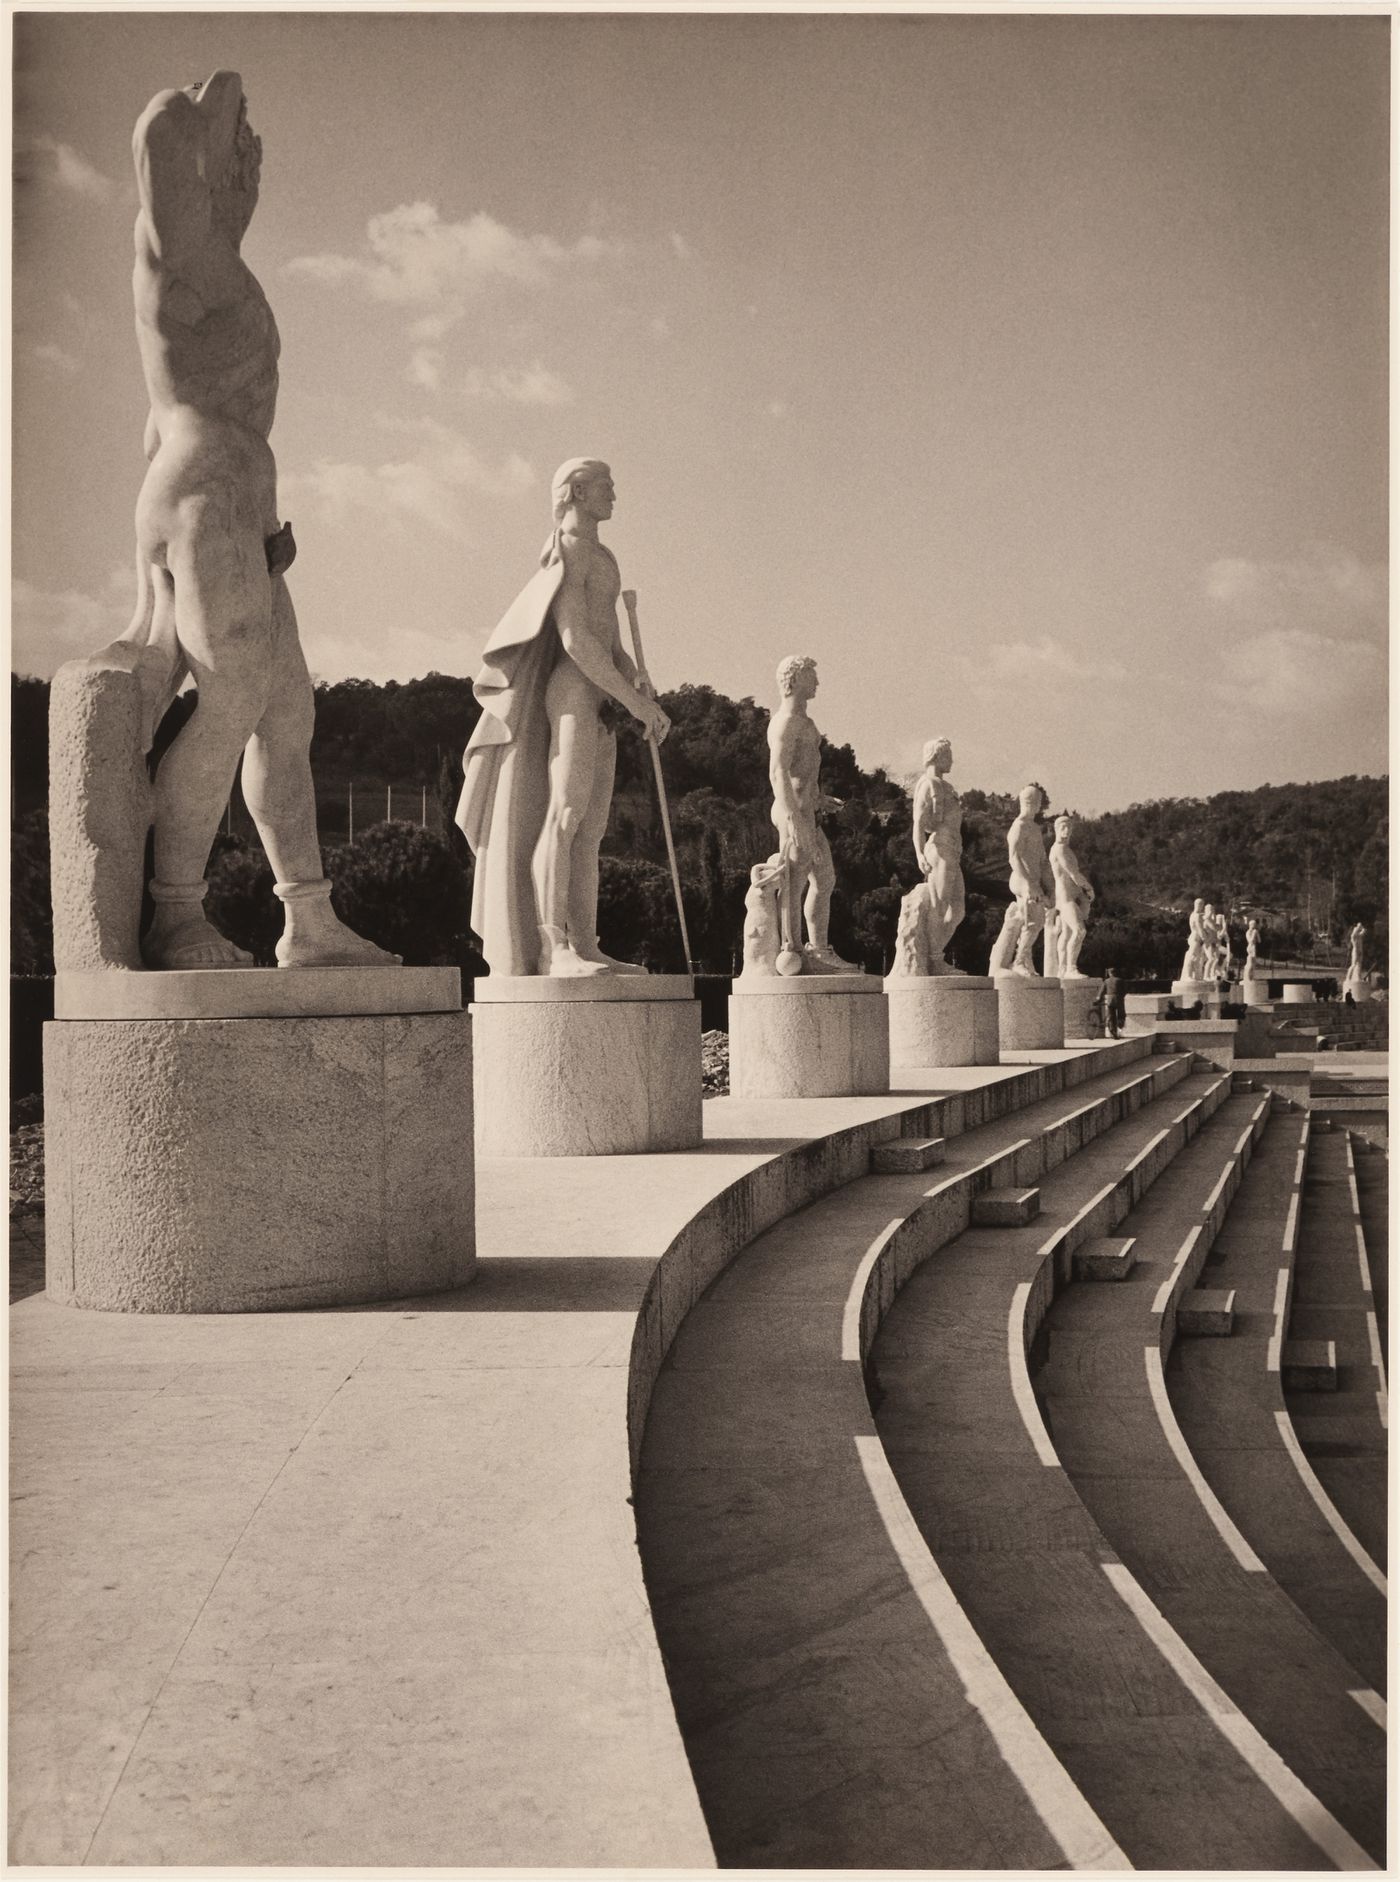 Detail of colossal statues of athletes in the Stadium of the Marbles (Stadio dei Marmi), Mussolini's forum, Rome, Italy